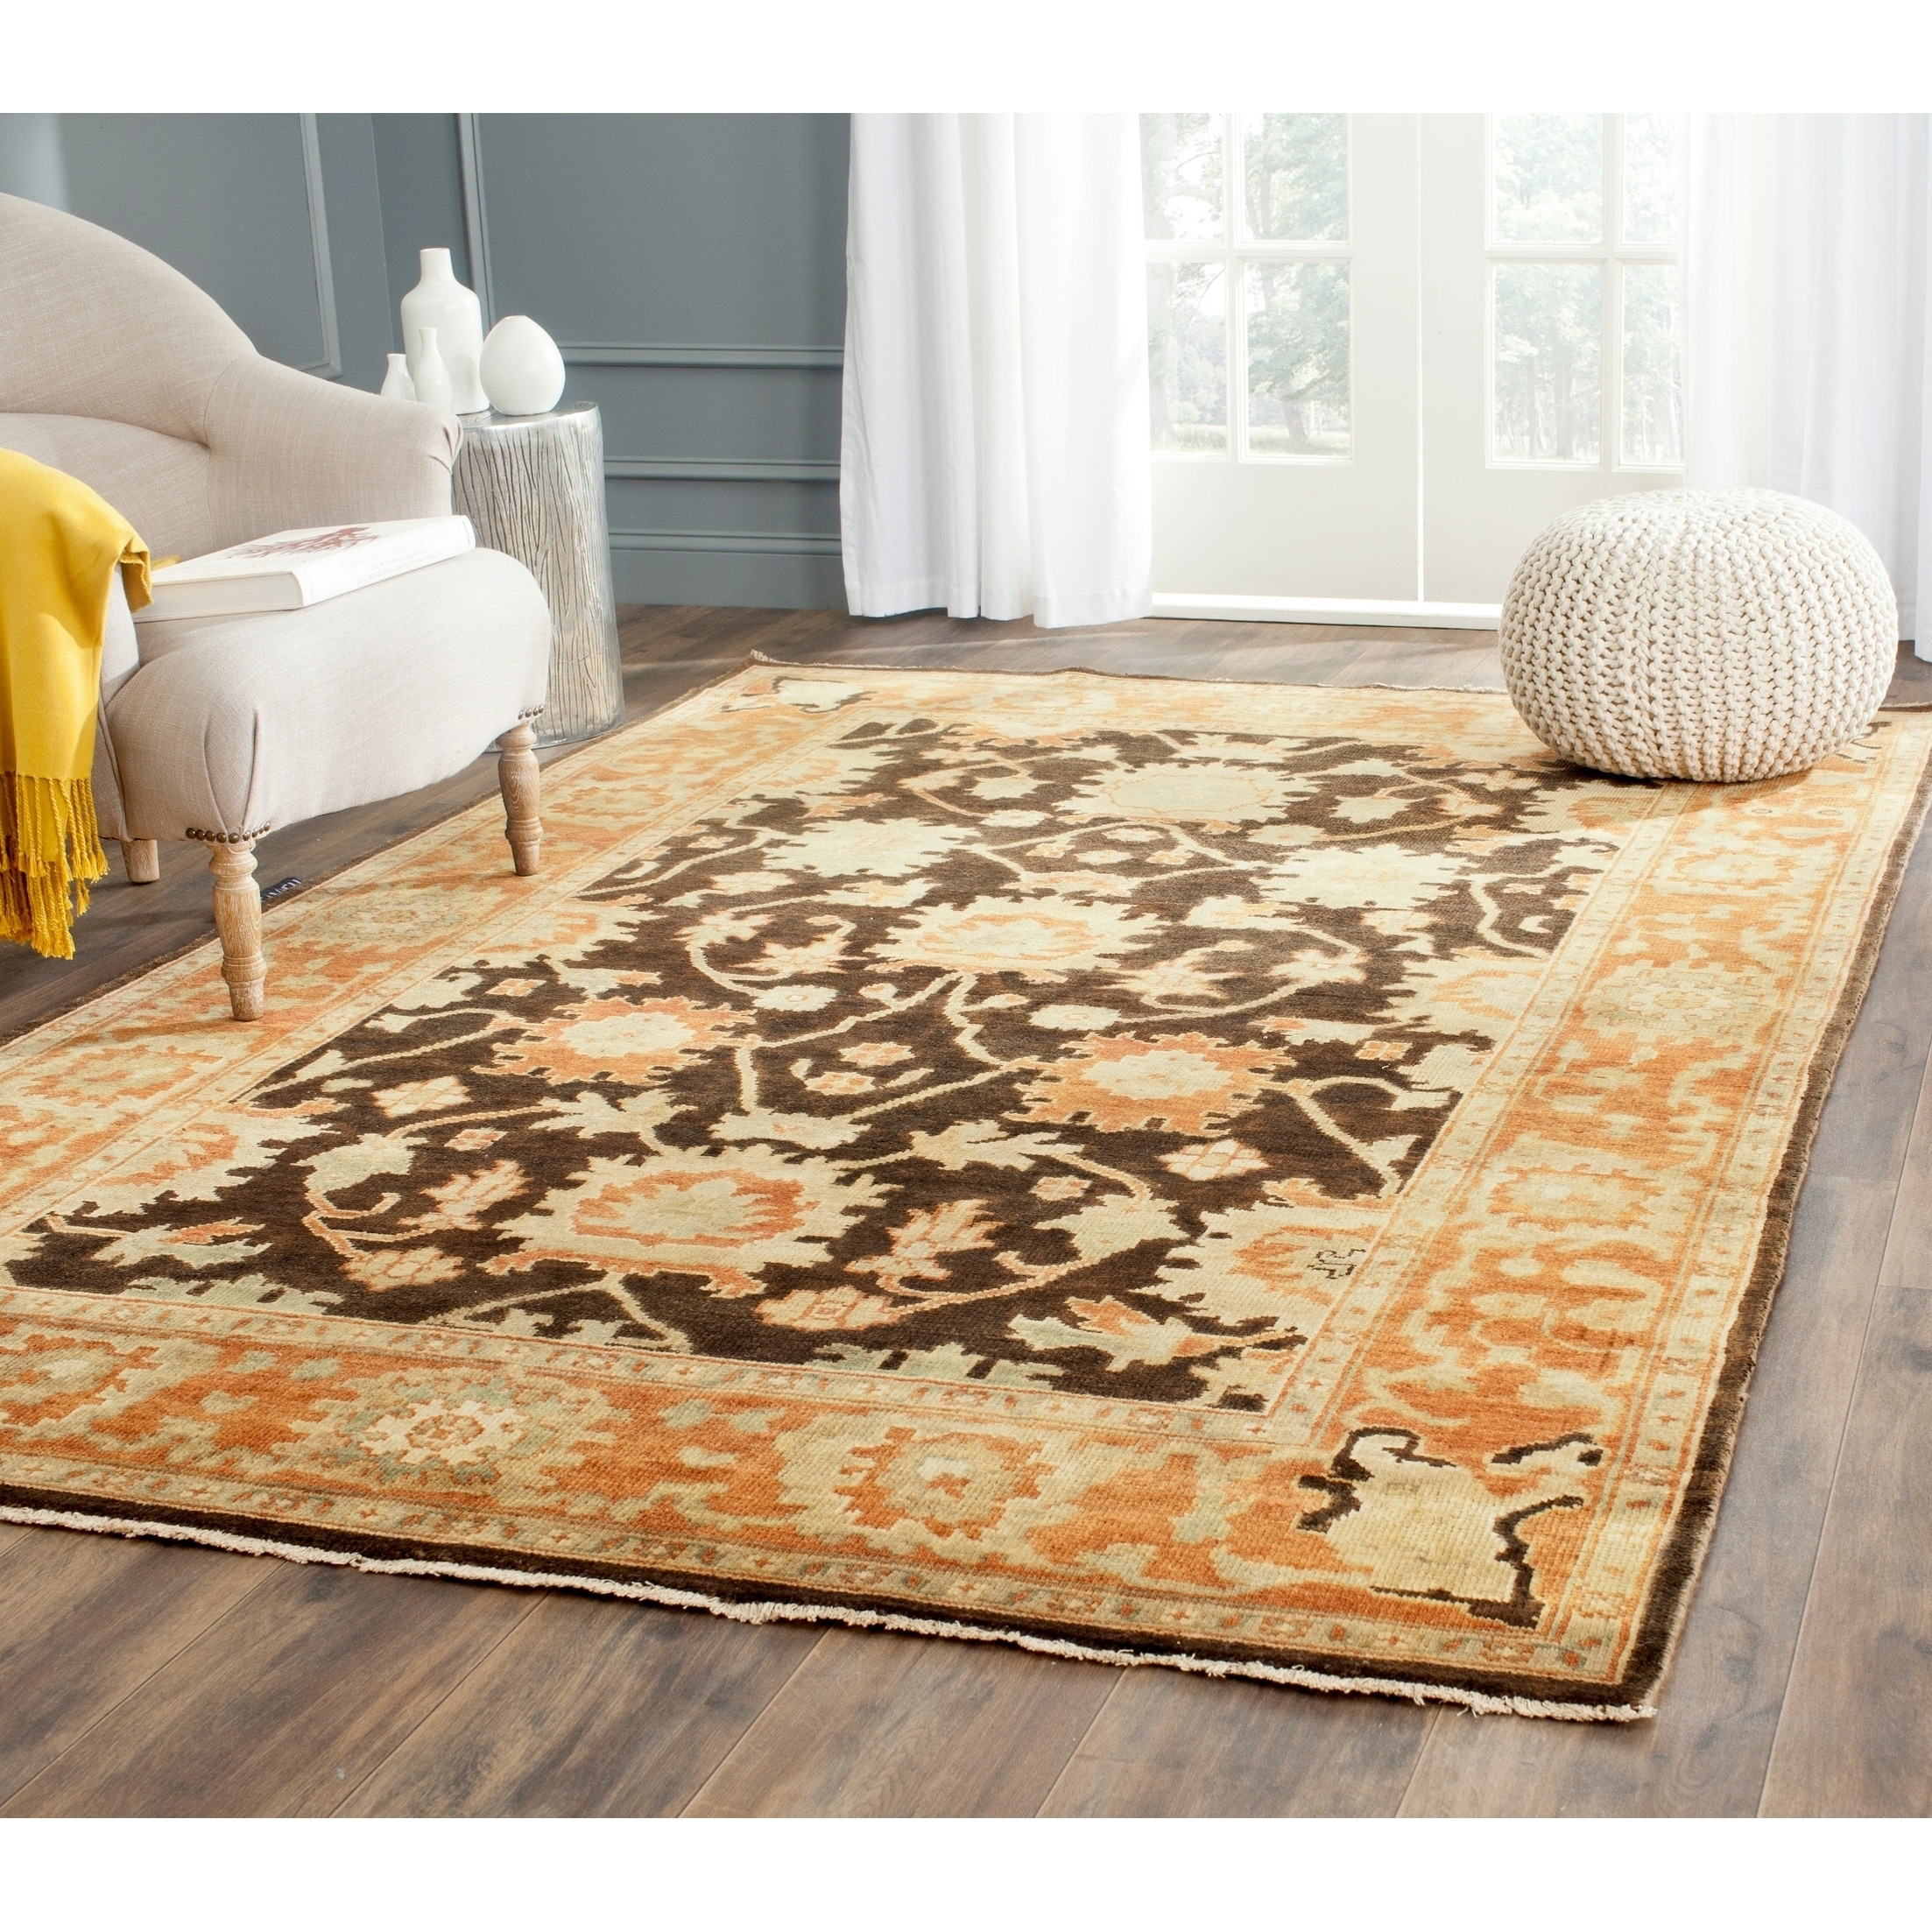 Safavieh Hand knotted Oushak Brown/ Rust Wool Rug (10 X 14)